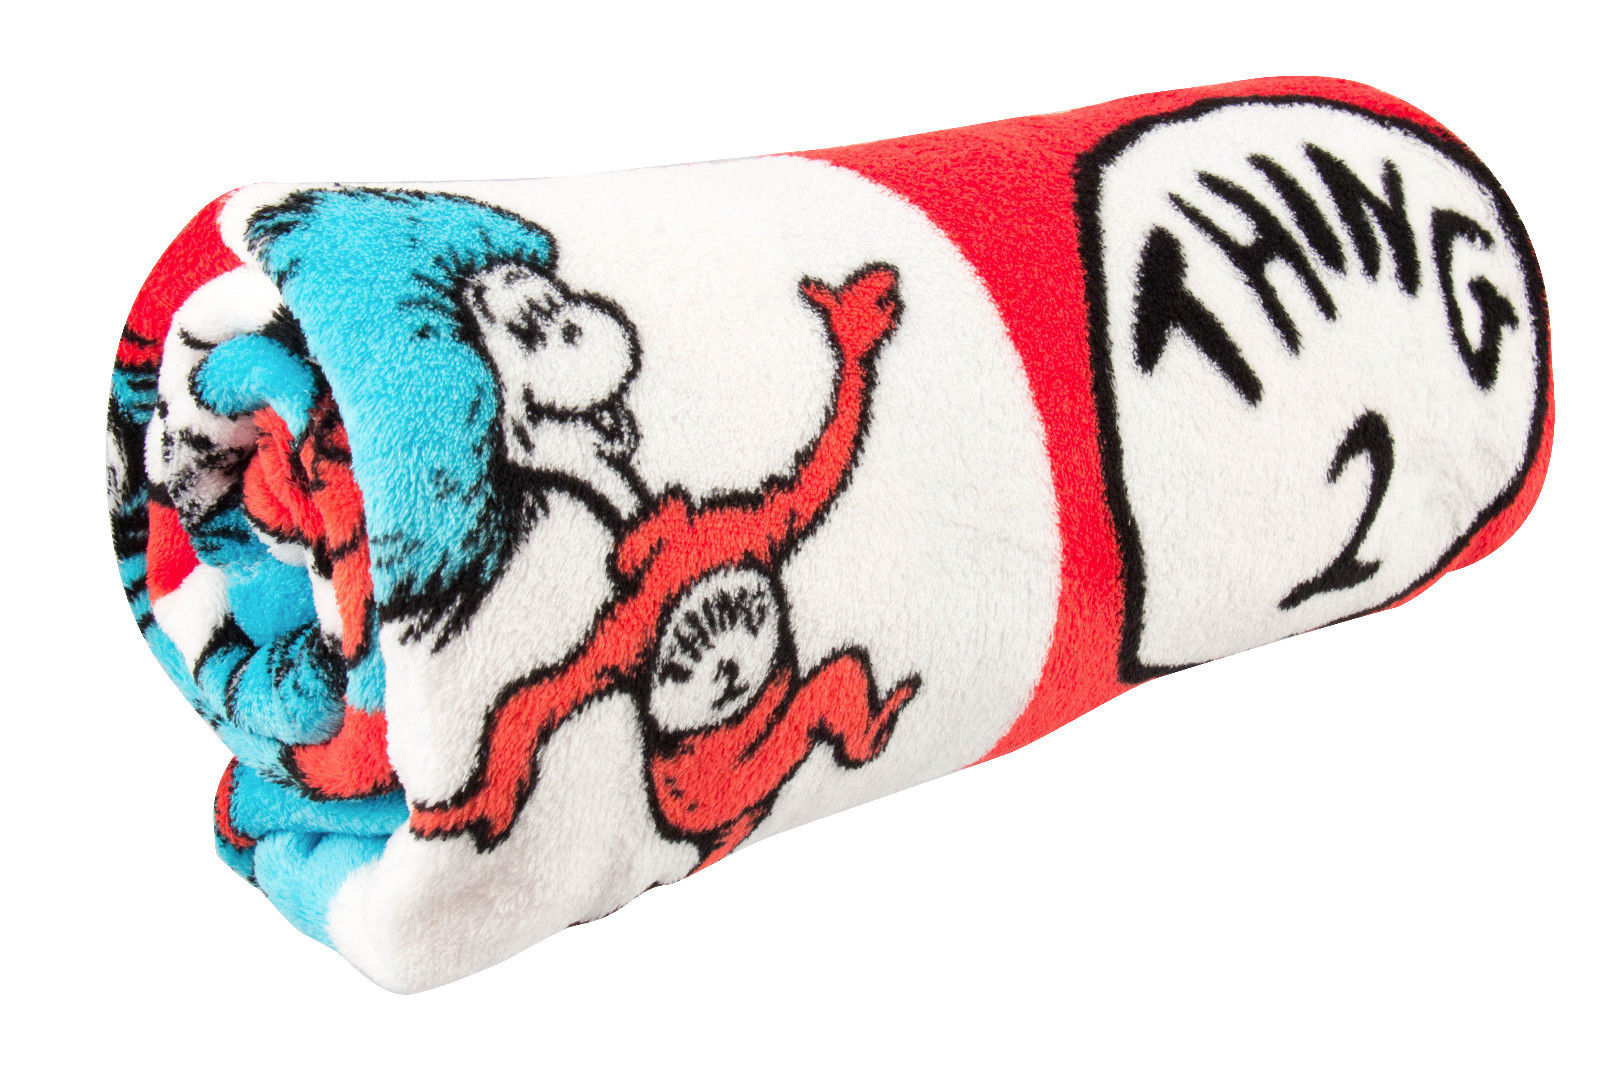 Dr Seuss Cat In The Hat Universal Studios Thing 1 Thing 2 Throw Blanket Super Soft 56 Hedgehogs Corner